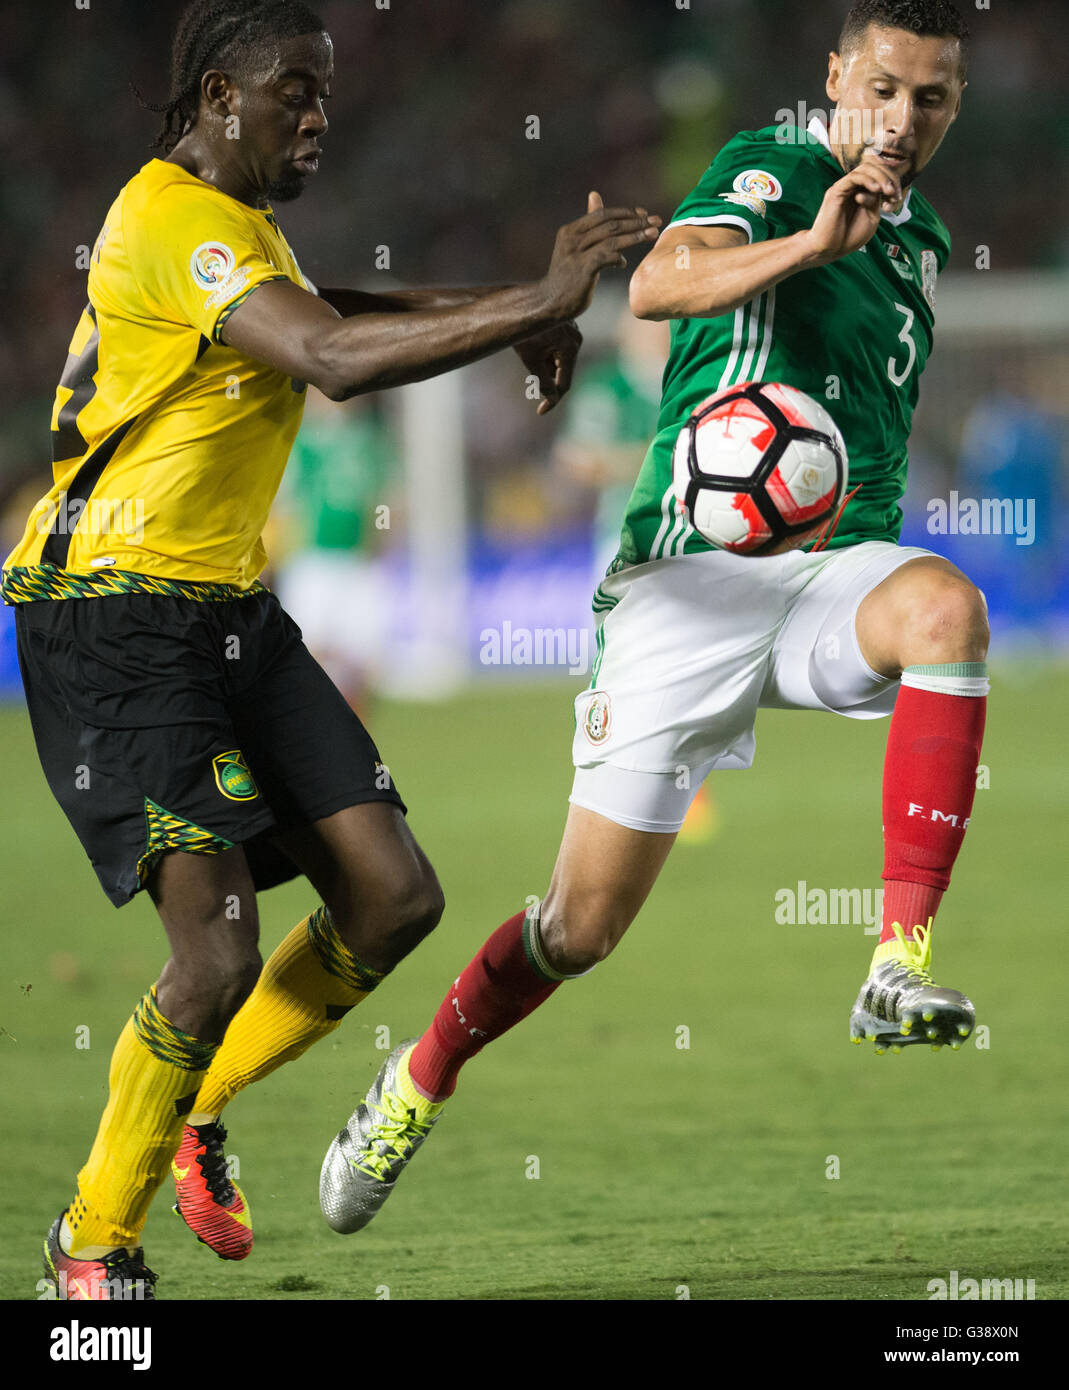 Pasadena, USA. 9th June, 2016. Mexico's Yasser Corona (R) vies for the ball during the Copa America Centenario tournament Group C football match between Mexico and Jamaica in Pasadena, California, the United States, on June 9, 2016. Credit:  Yang Lei/Xinhua/Alamy Live News Stock Photo